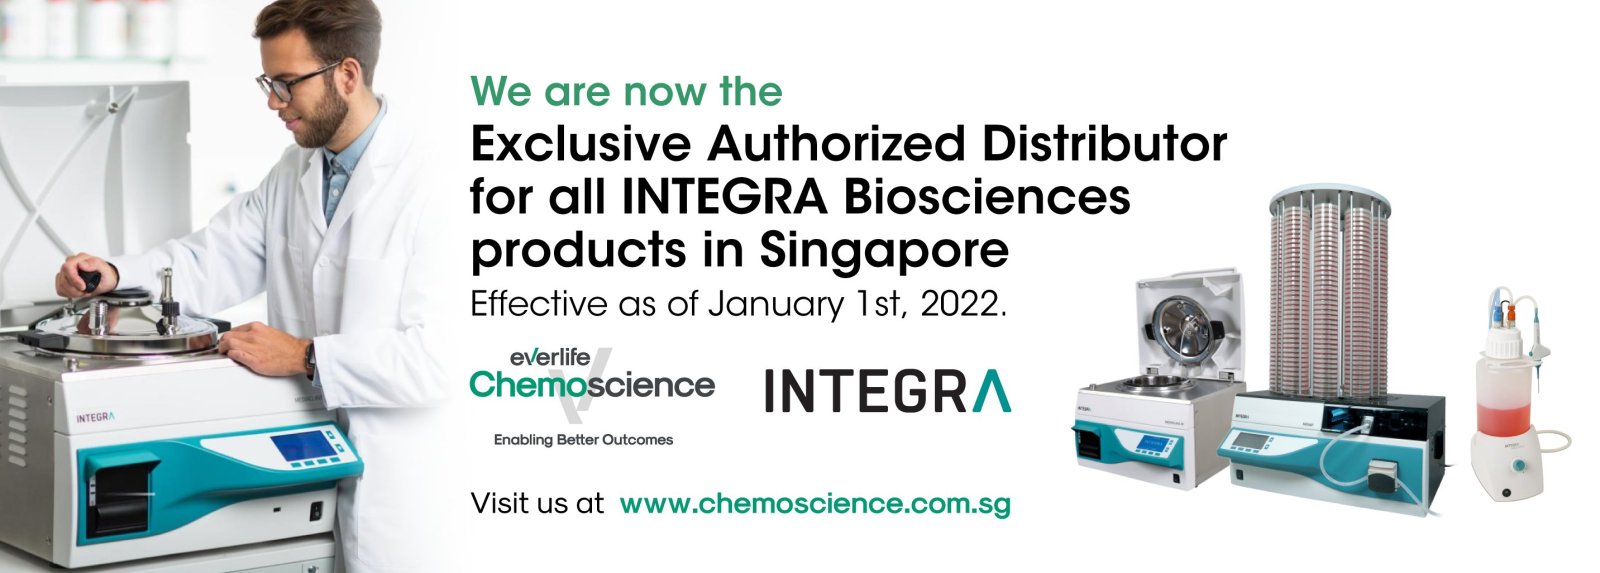 Chemoscience Singapore is officially the Exclusive Authorized ...